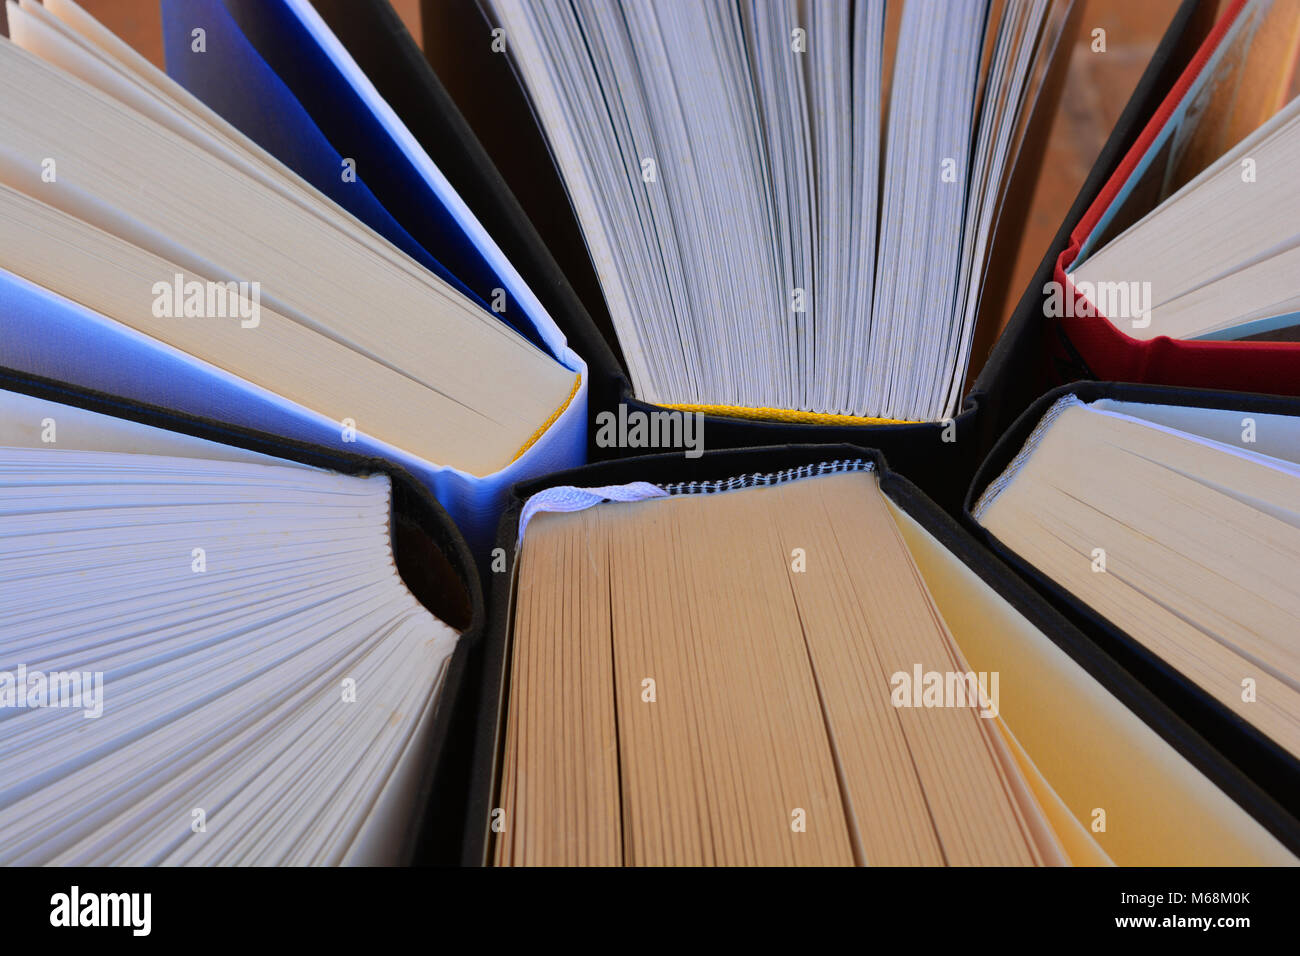 Hardback books, with pages fanned open Stock Photo